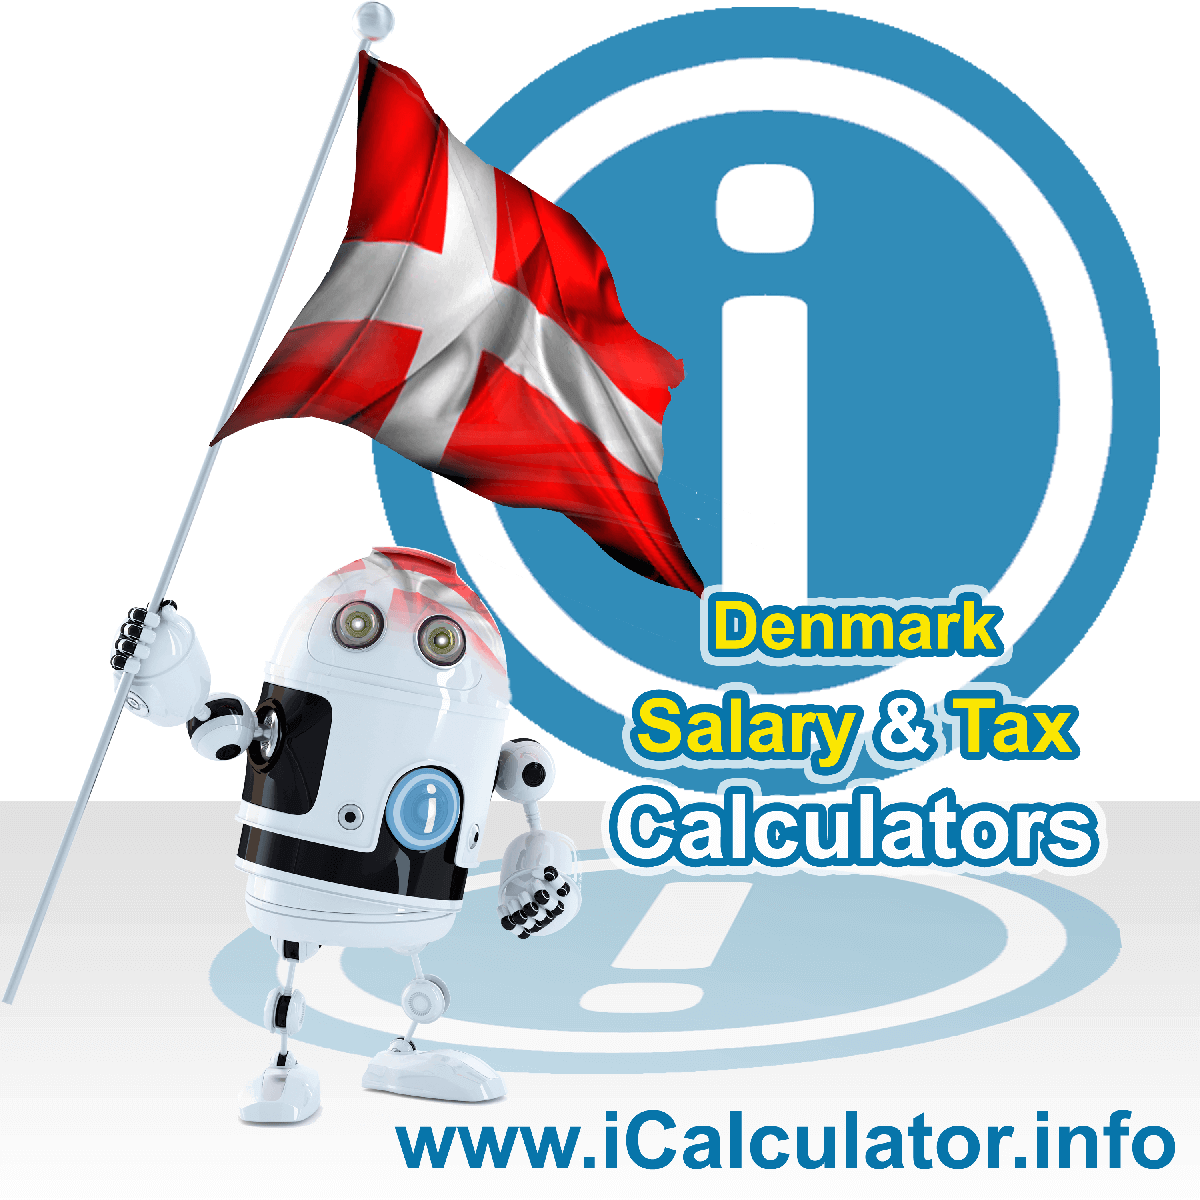 Denmark Salary Calculator. This image shows the Denmarkese flag and information relating to the tax formula for the Denmark Tax Calculator